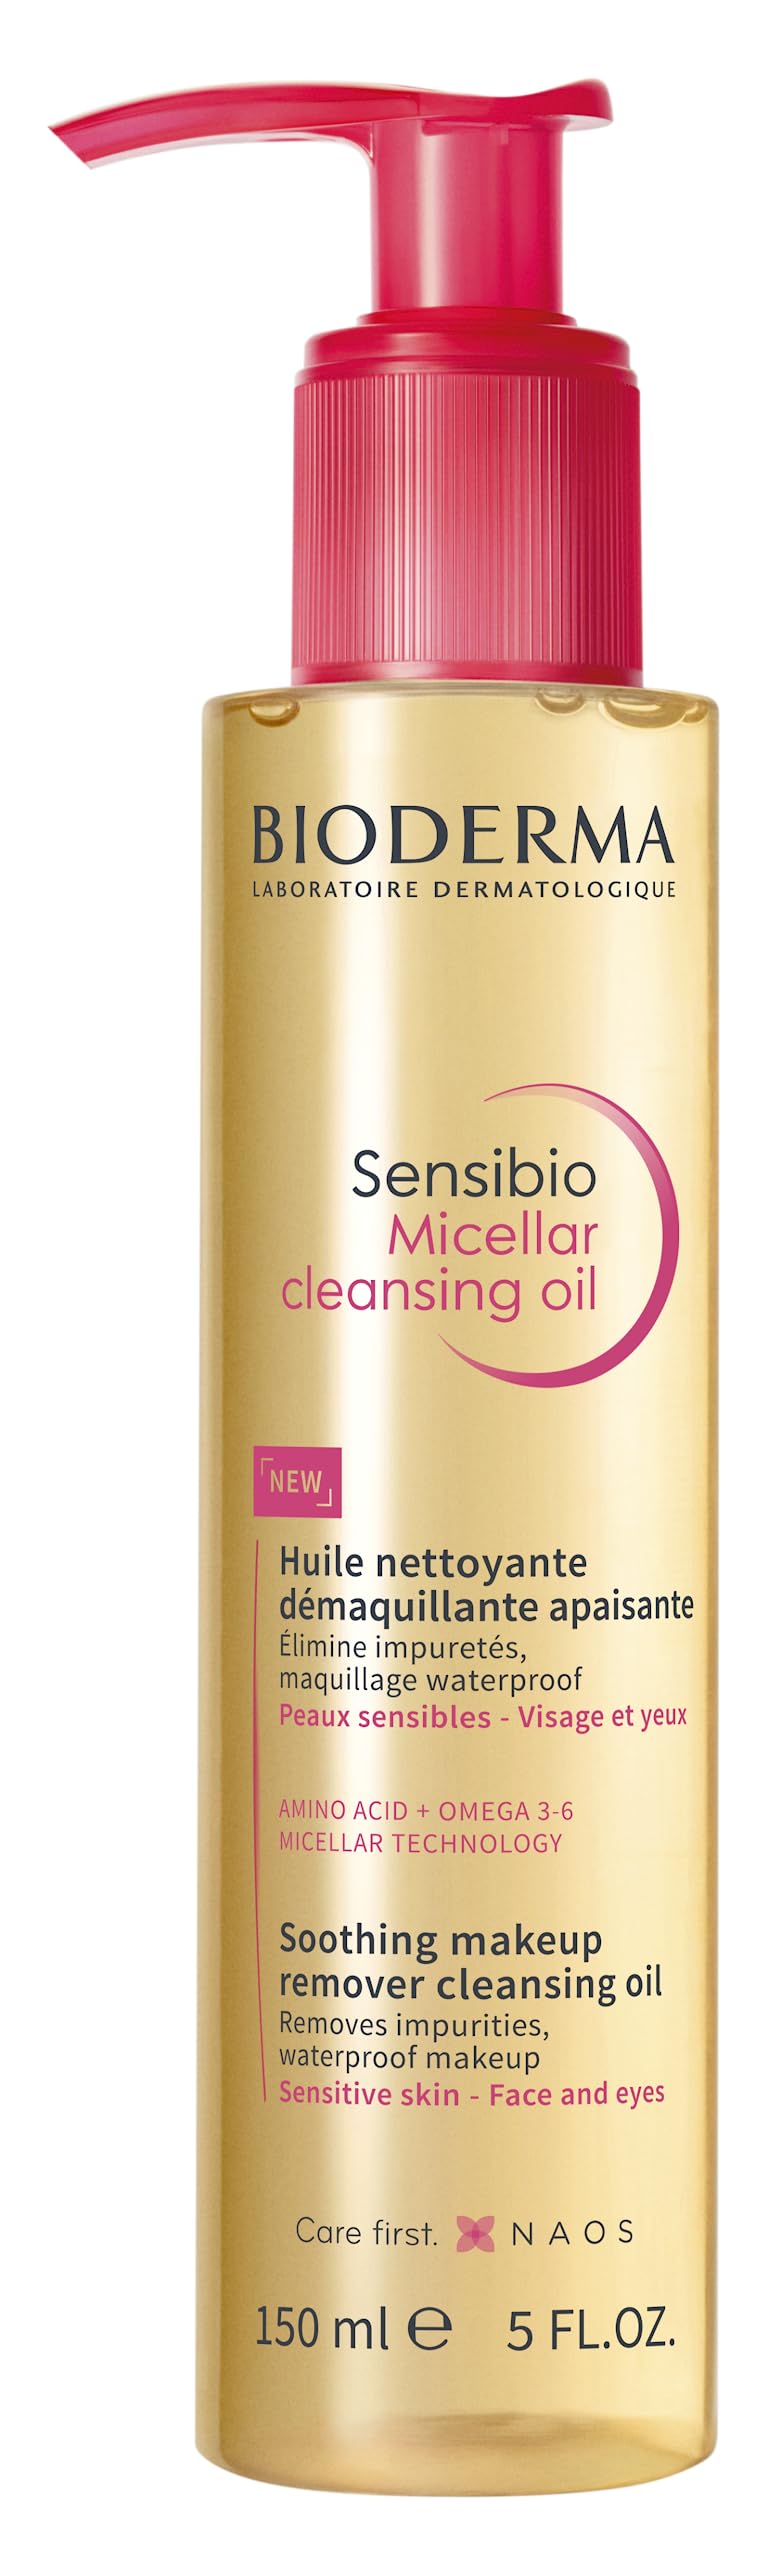 Bioderma - Sensibio Micellar Cleansing Oil 150ml - The 1st eco-biological micellar oil that cleanses and cares for the skin